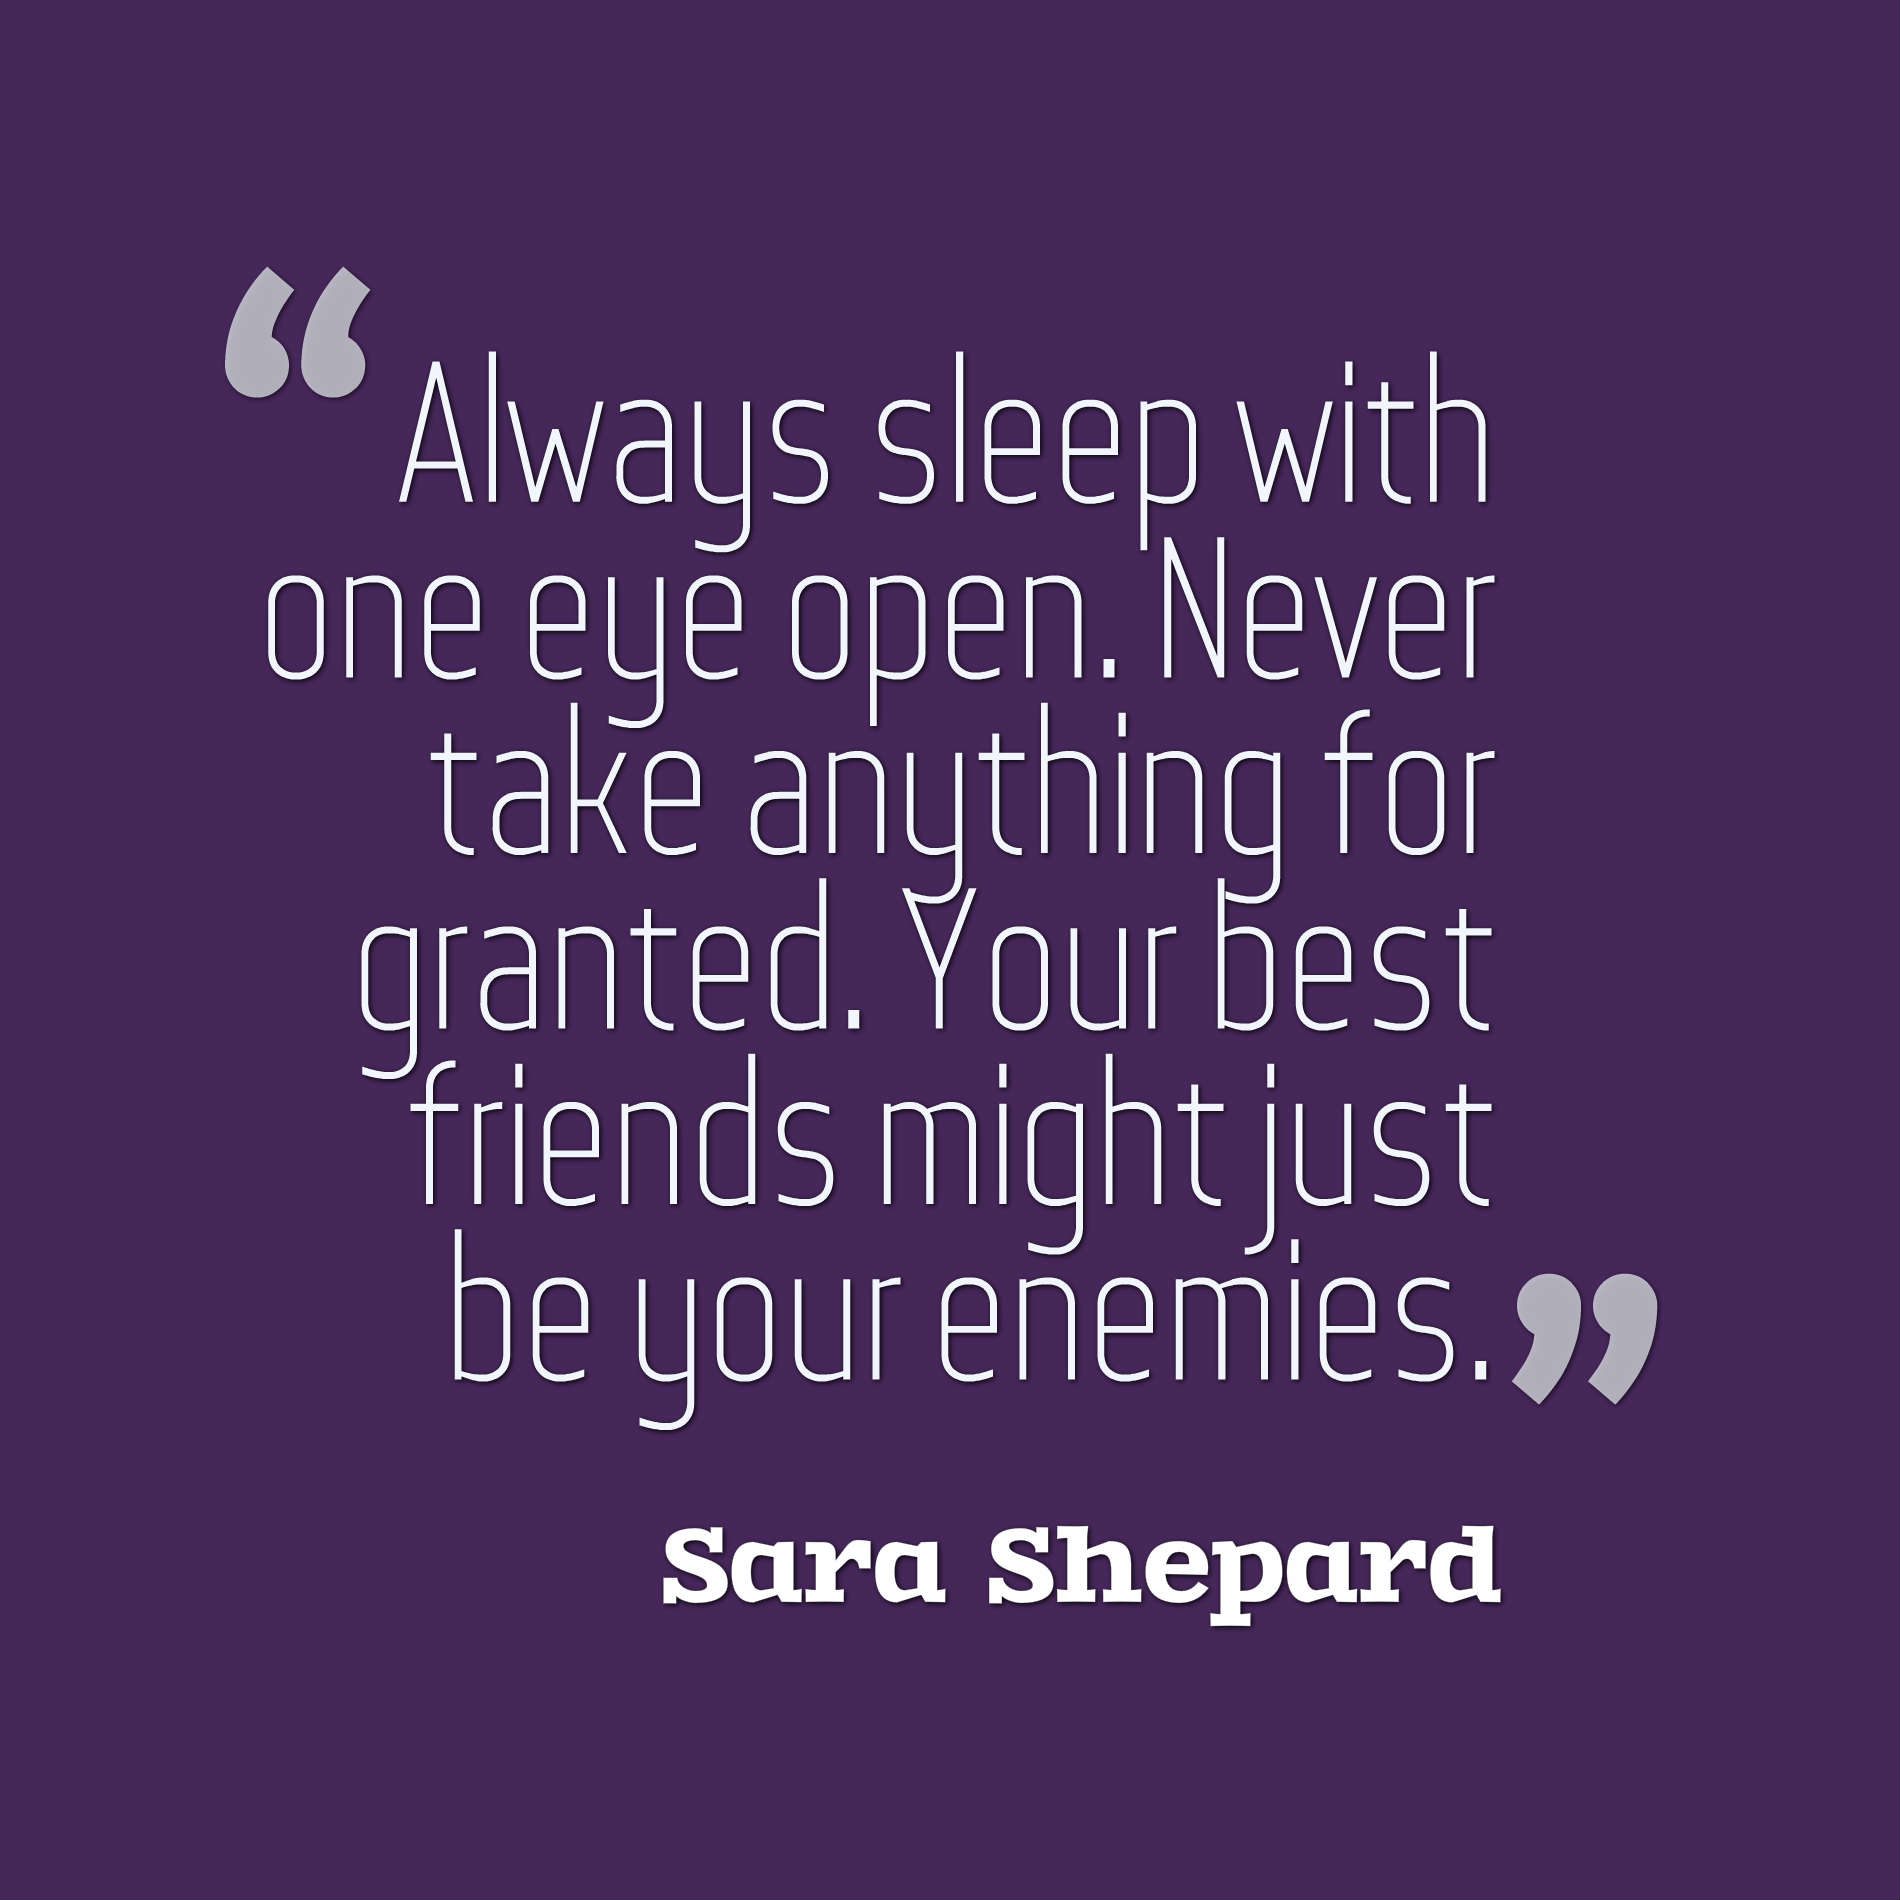 Always sleep with one eye open. Never take anything for granted. Your best friends might just be your enemies.